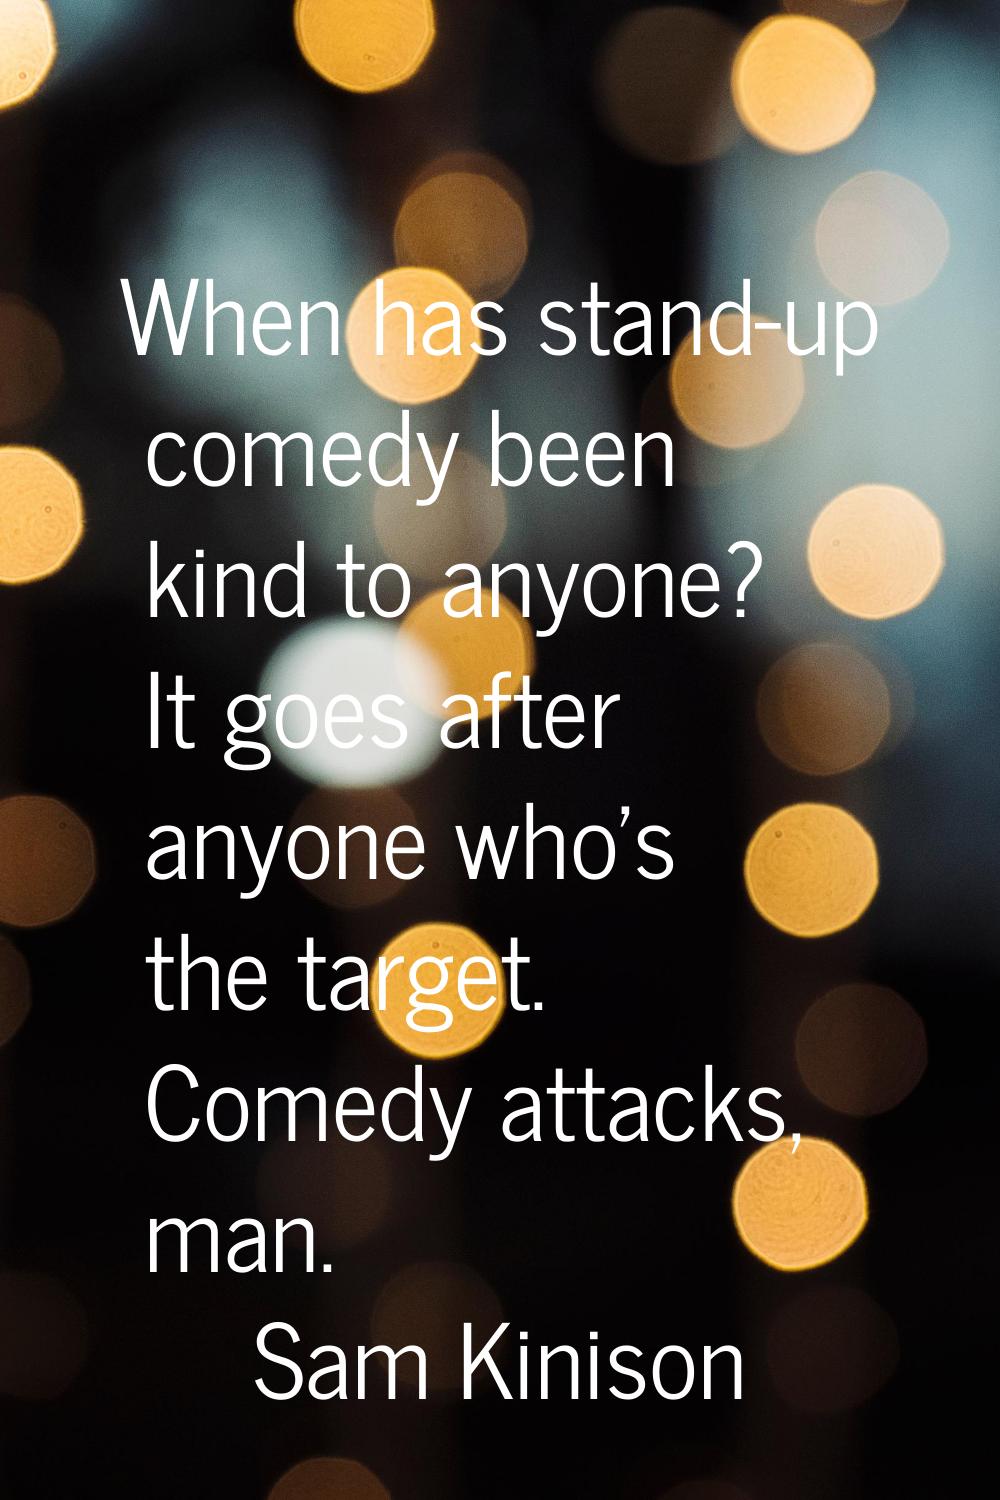 When has stand-up comedy been kind to anyone? It goes after anyone who's the target. Comedy attacks